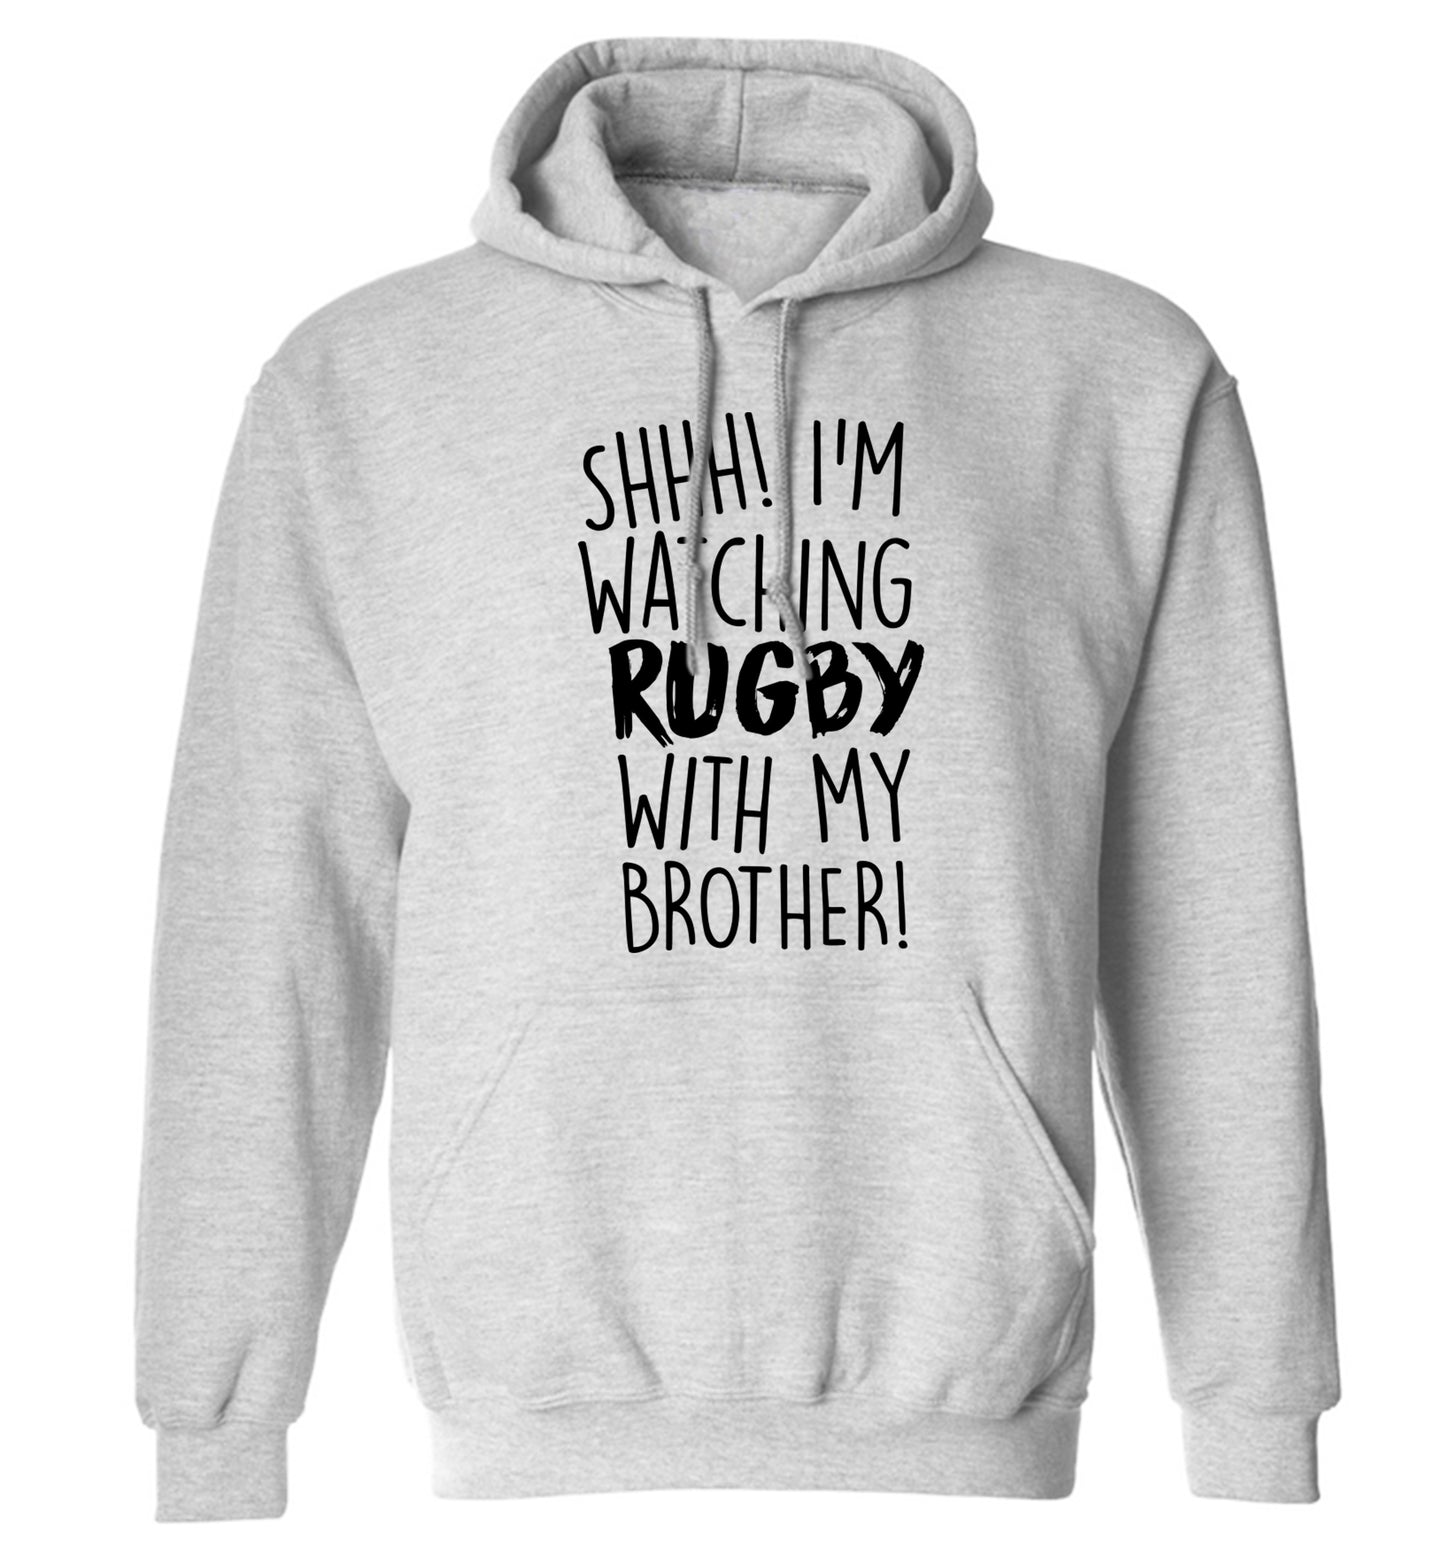 Shh... I'm watching rugby with my brother adults unisex grey hoodie 2XL